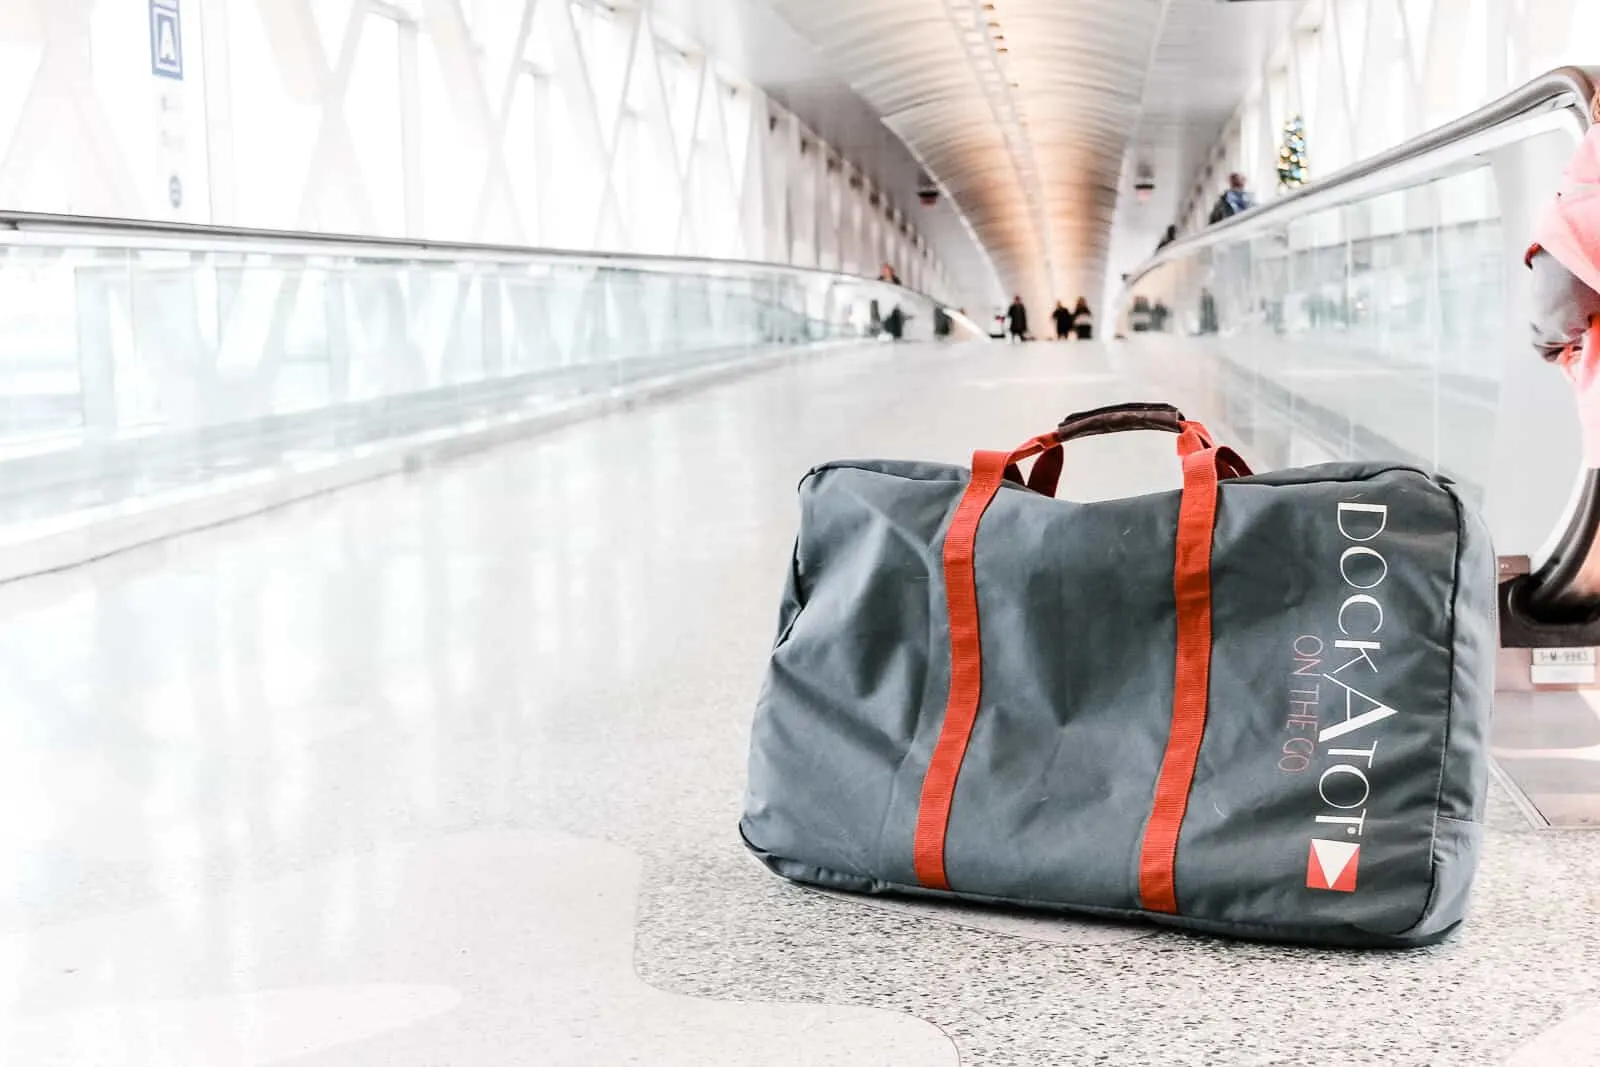 travel with a dockatot transport bag in airport